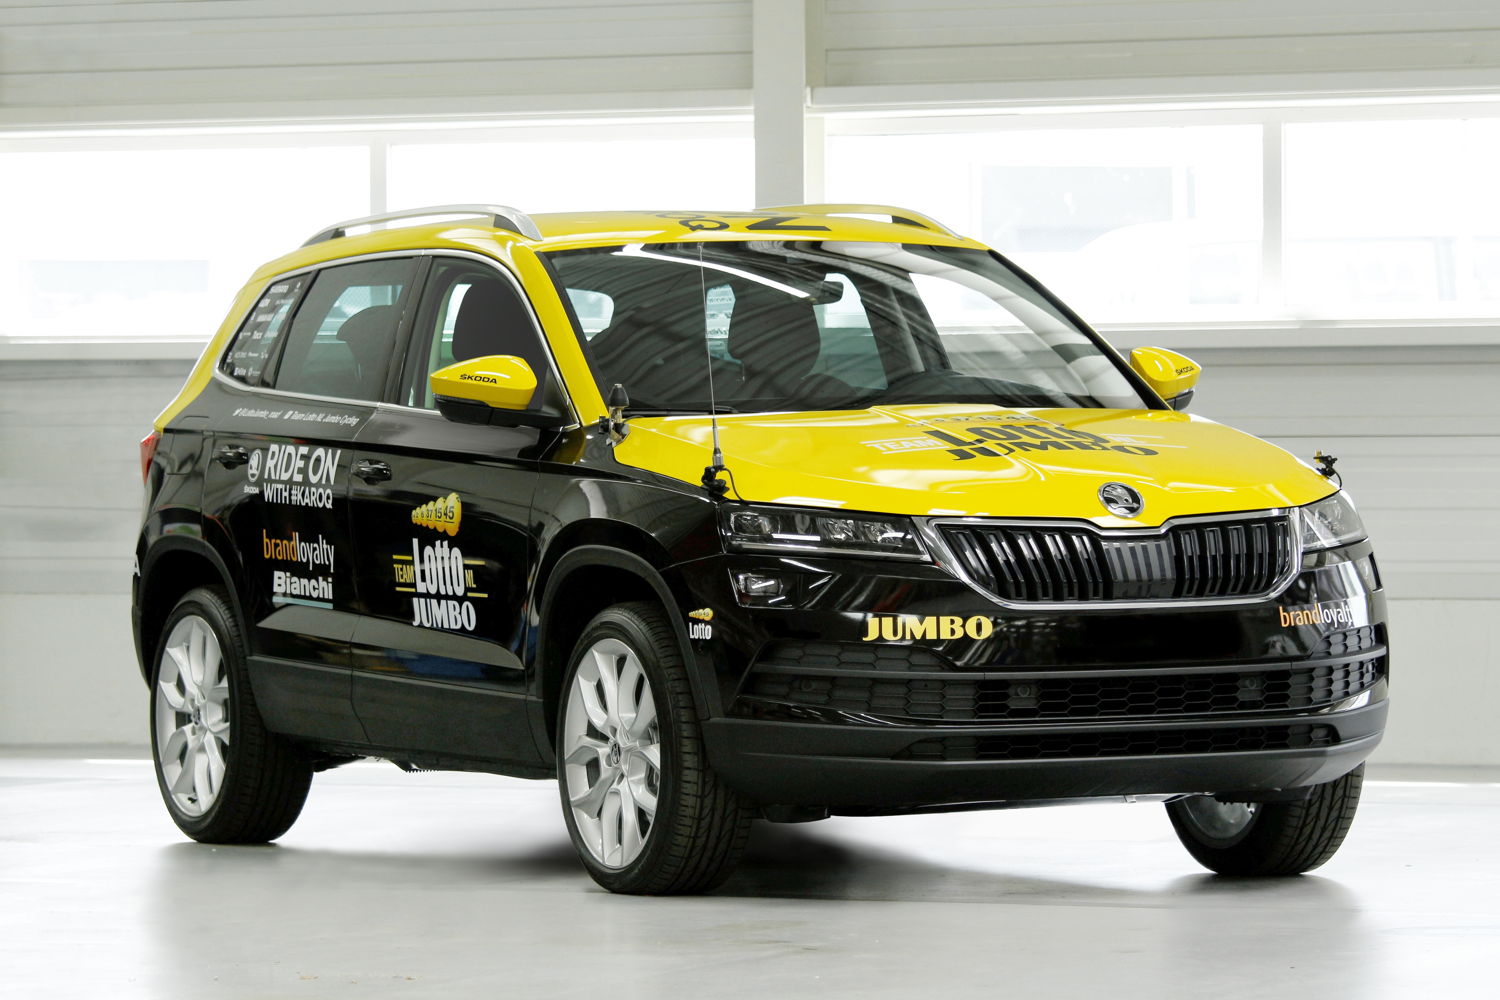 The ŠKODA KAROQ is acting as a service vehicle for the Lotto Jumbo team from the Netherlands during the first stage of the Tour de France in Düsseldorf.